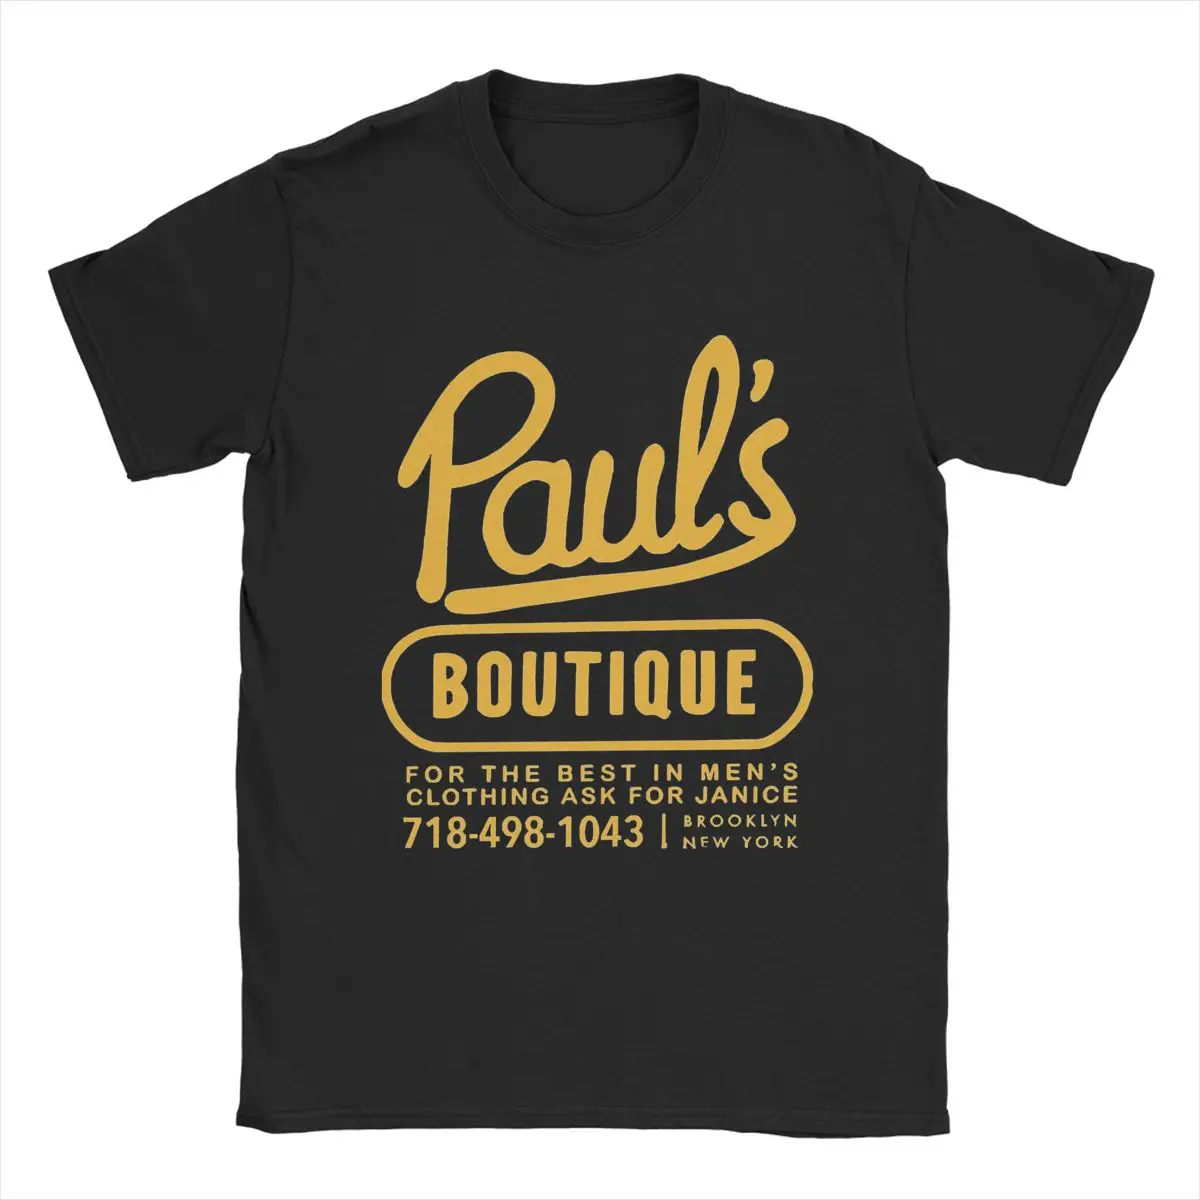 Beastie Boys Pauls Boutique T Shirts Men's 100% Cotton Funny T-Shirts Round Neck Tee Shirt Short Sleeve Tops New Arrival